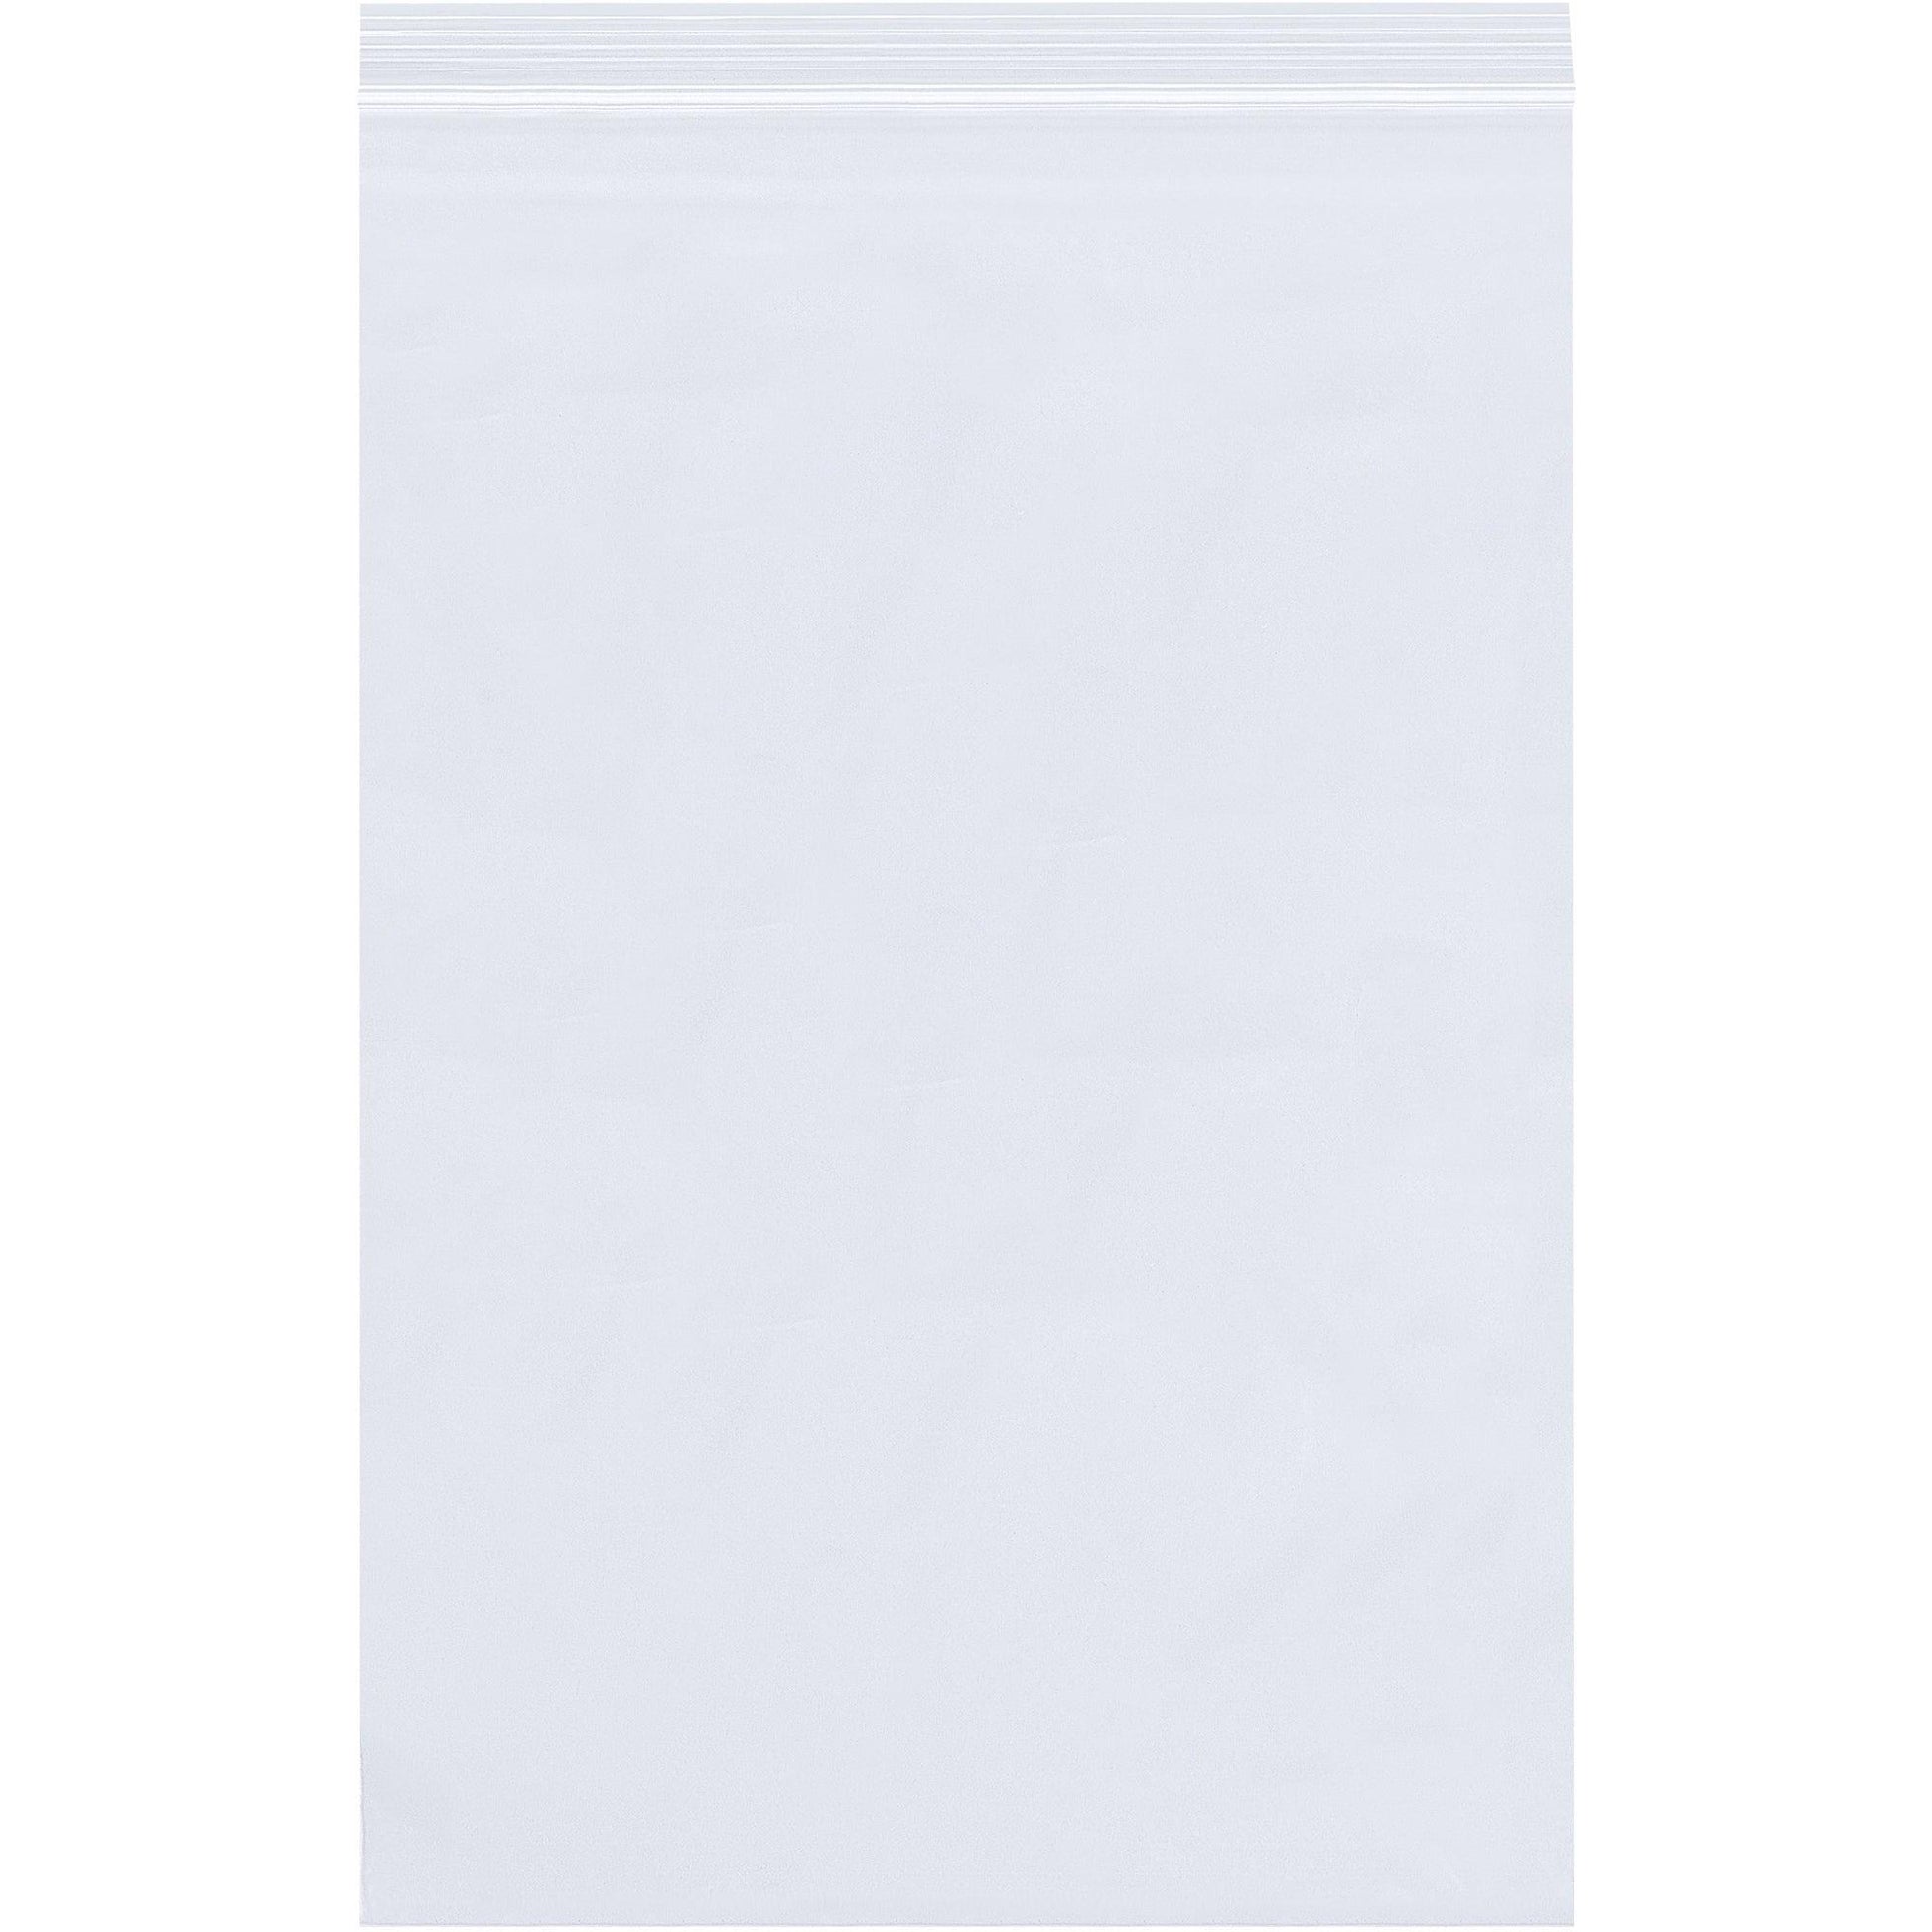 13 x 15" - 2 Mil Reclosable Poly Bags - PB3675